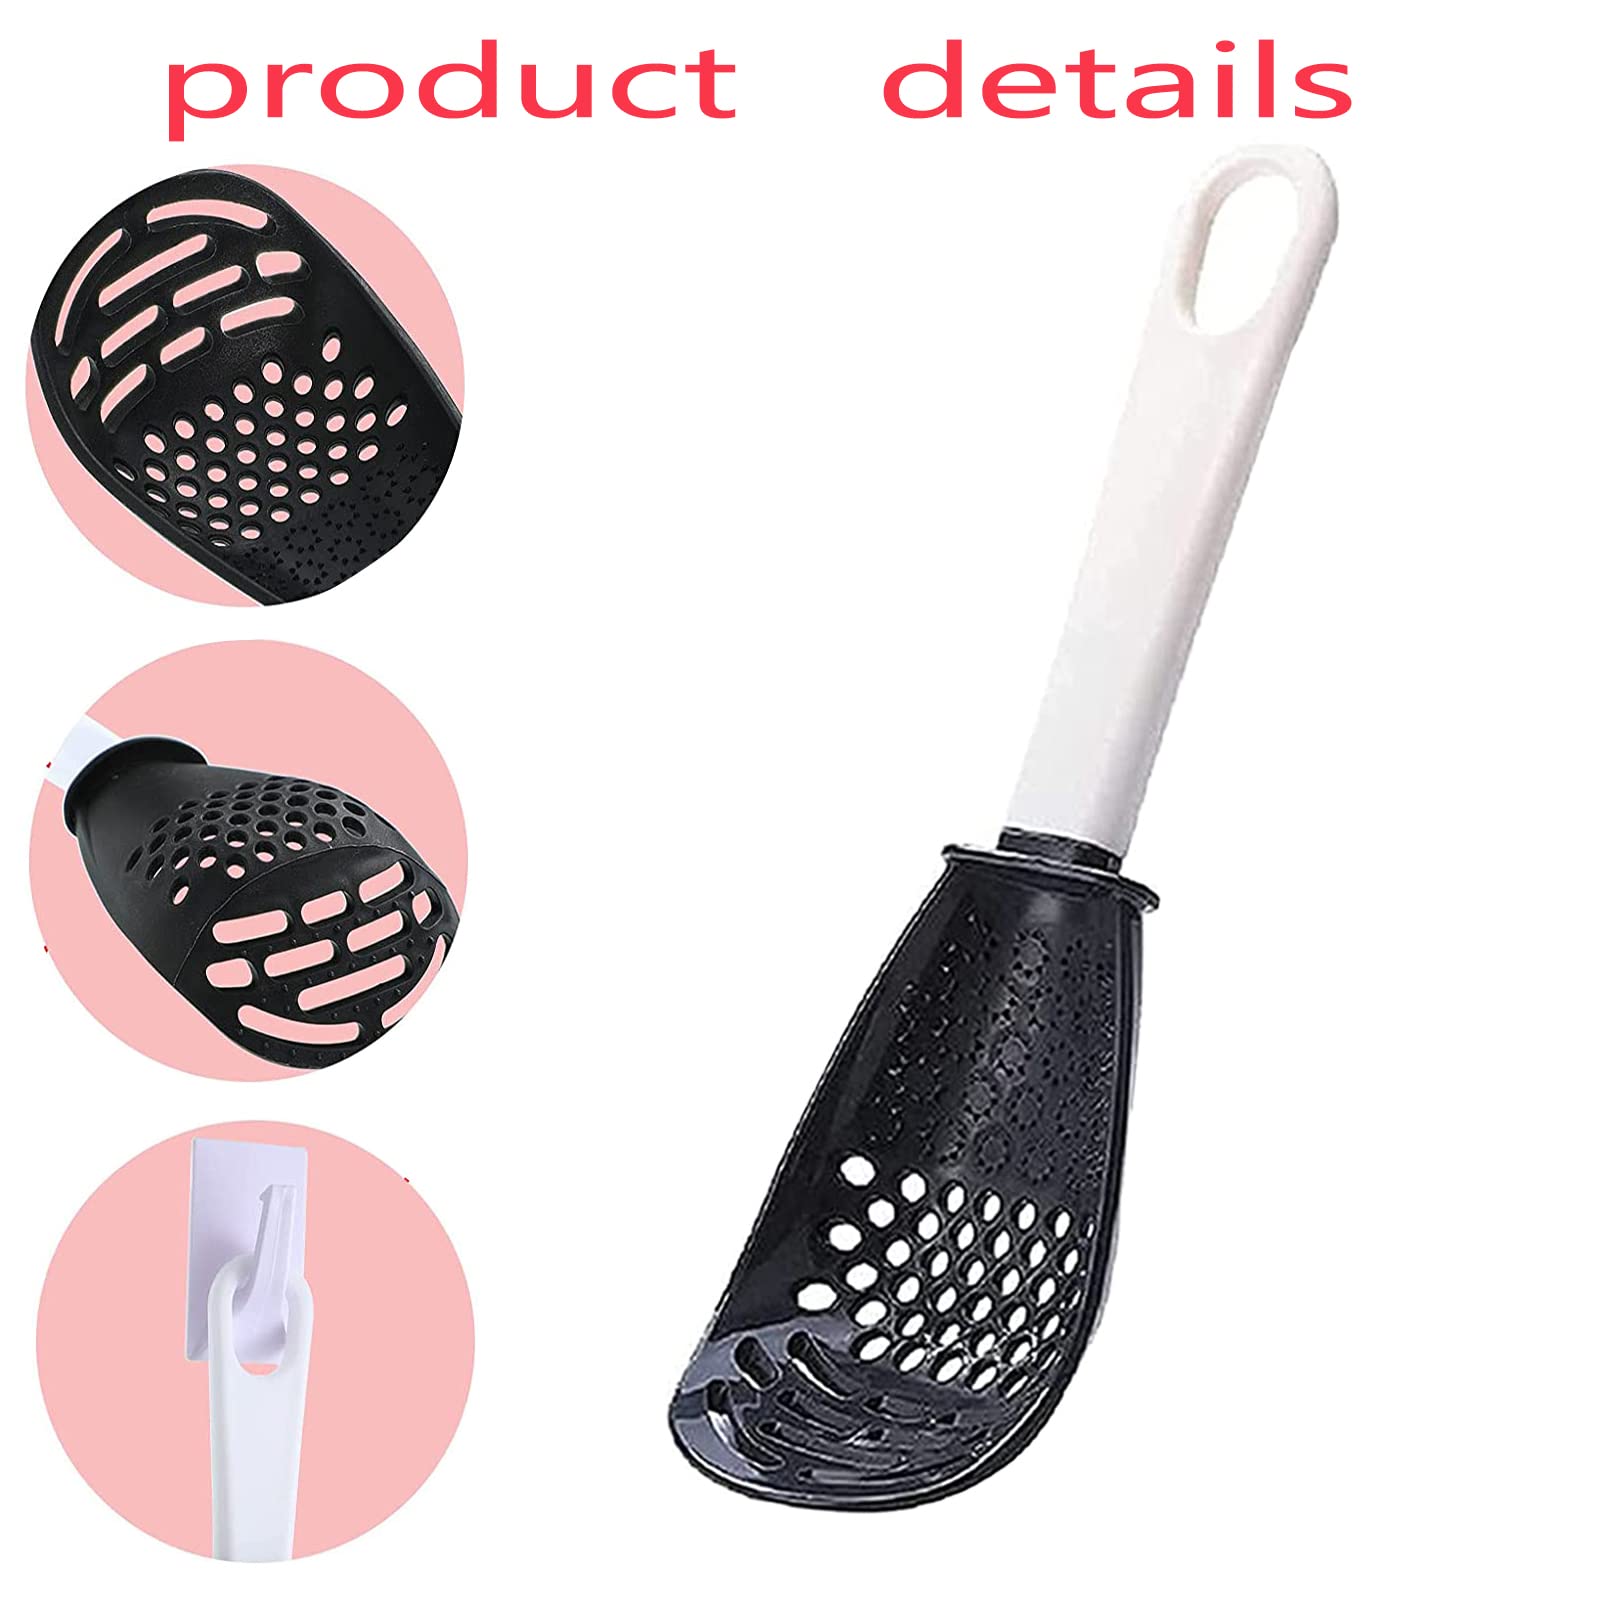 Xesakesi 4 PCS Multifunctional Cooking Spoon, All Purpose Kitchen Tool Skimmer Scoop Colander Strainer Grater Masher, Food-Grade High Temperature Resistant Cooking Gadgets, Plastic (2Red+2Black)